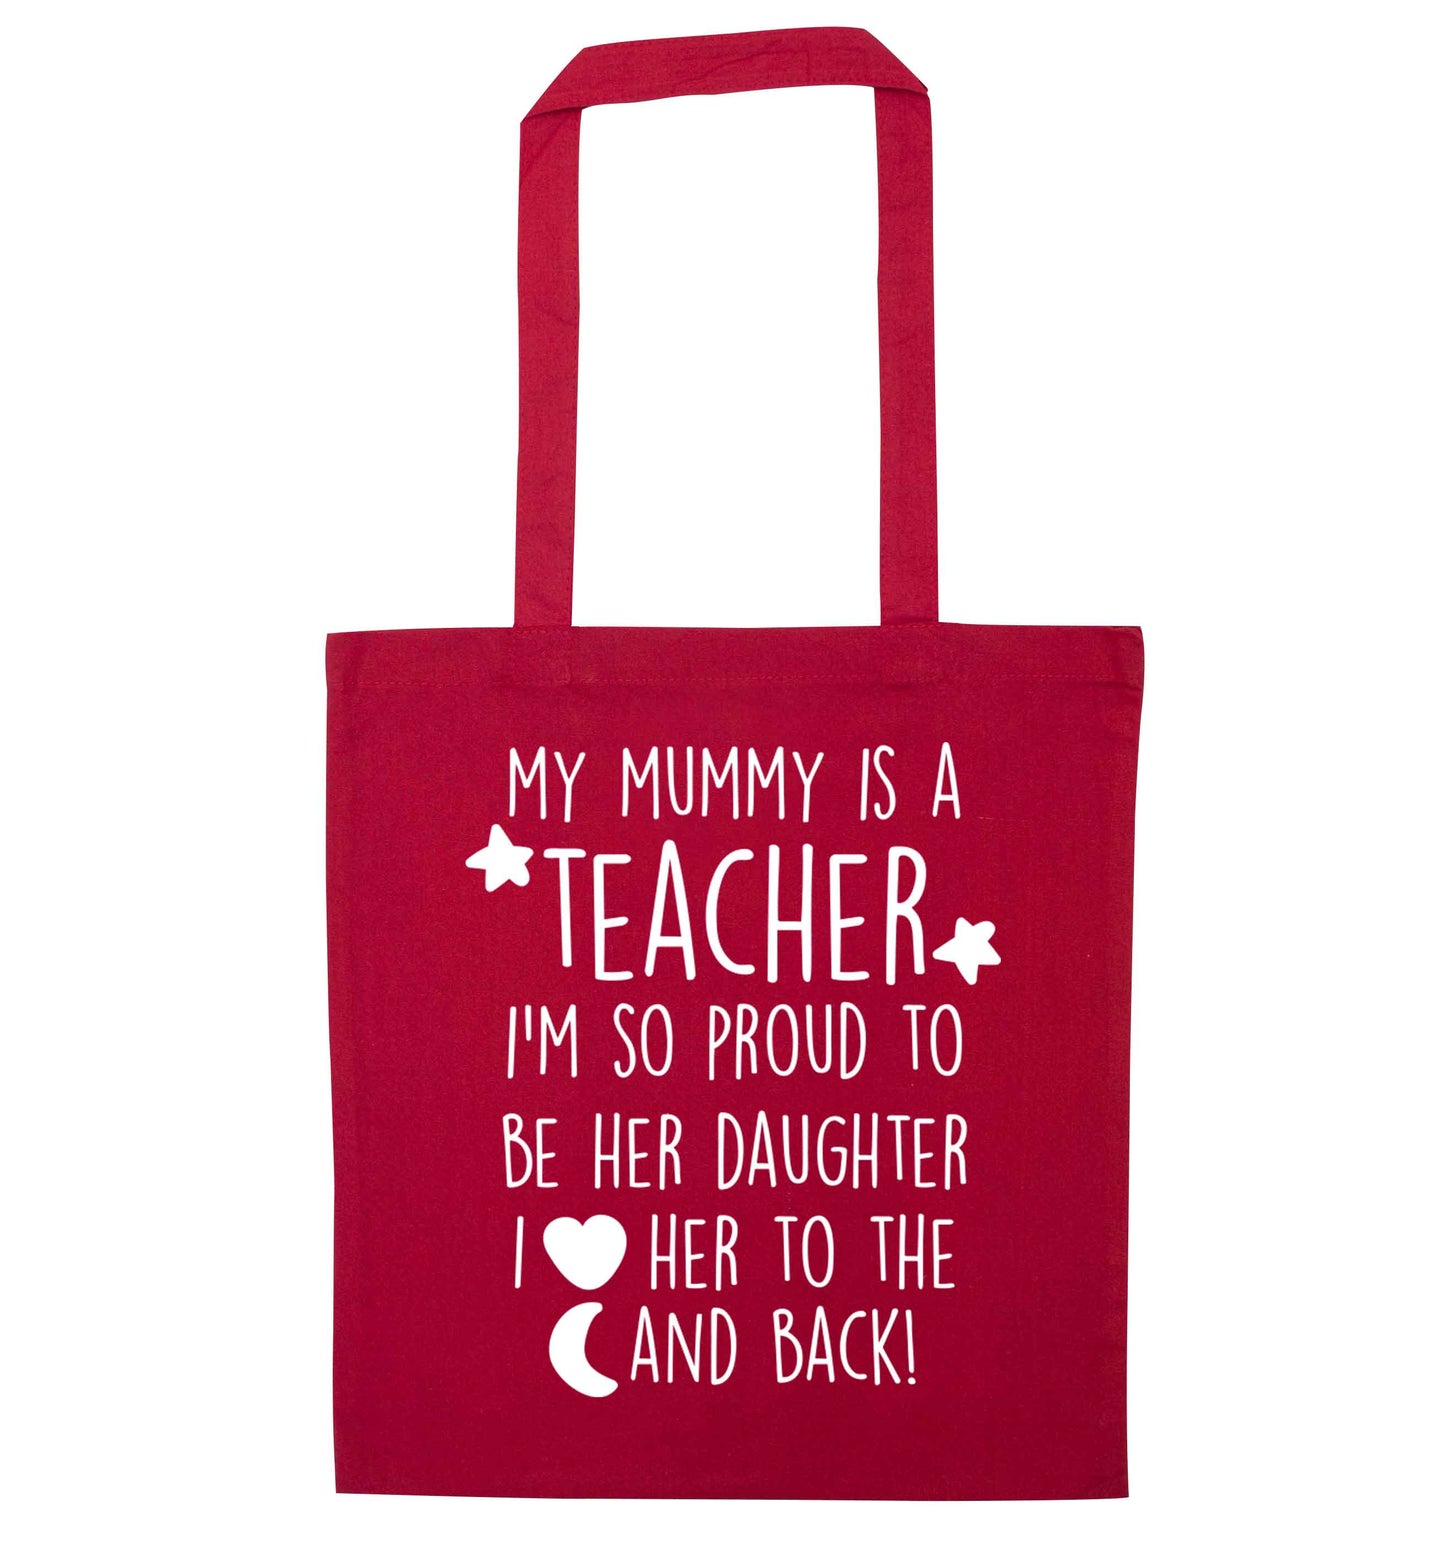 My mummy is a teacher I'm so proud to be her daughter I love her to the moon and back red tote bag